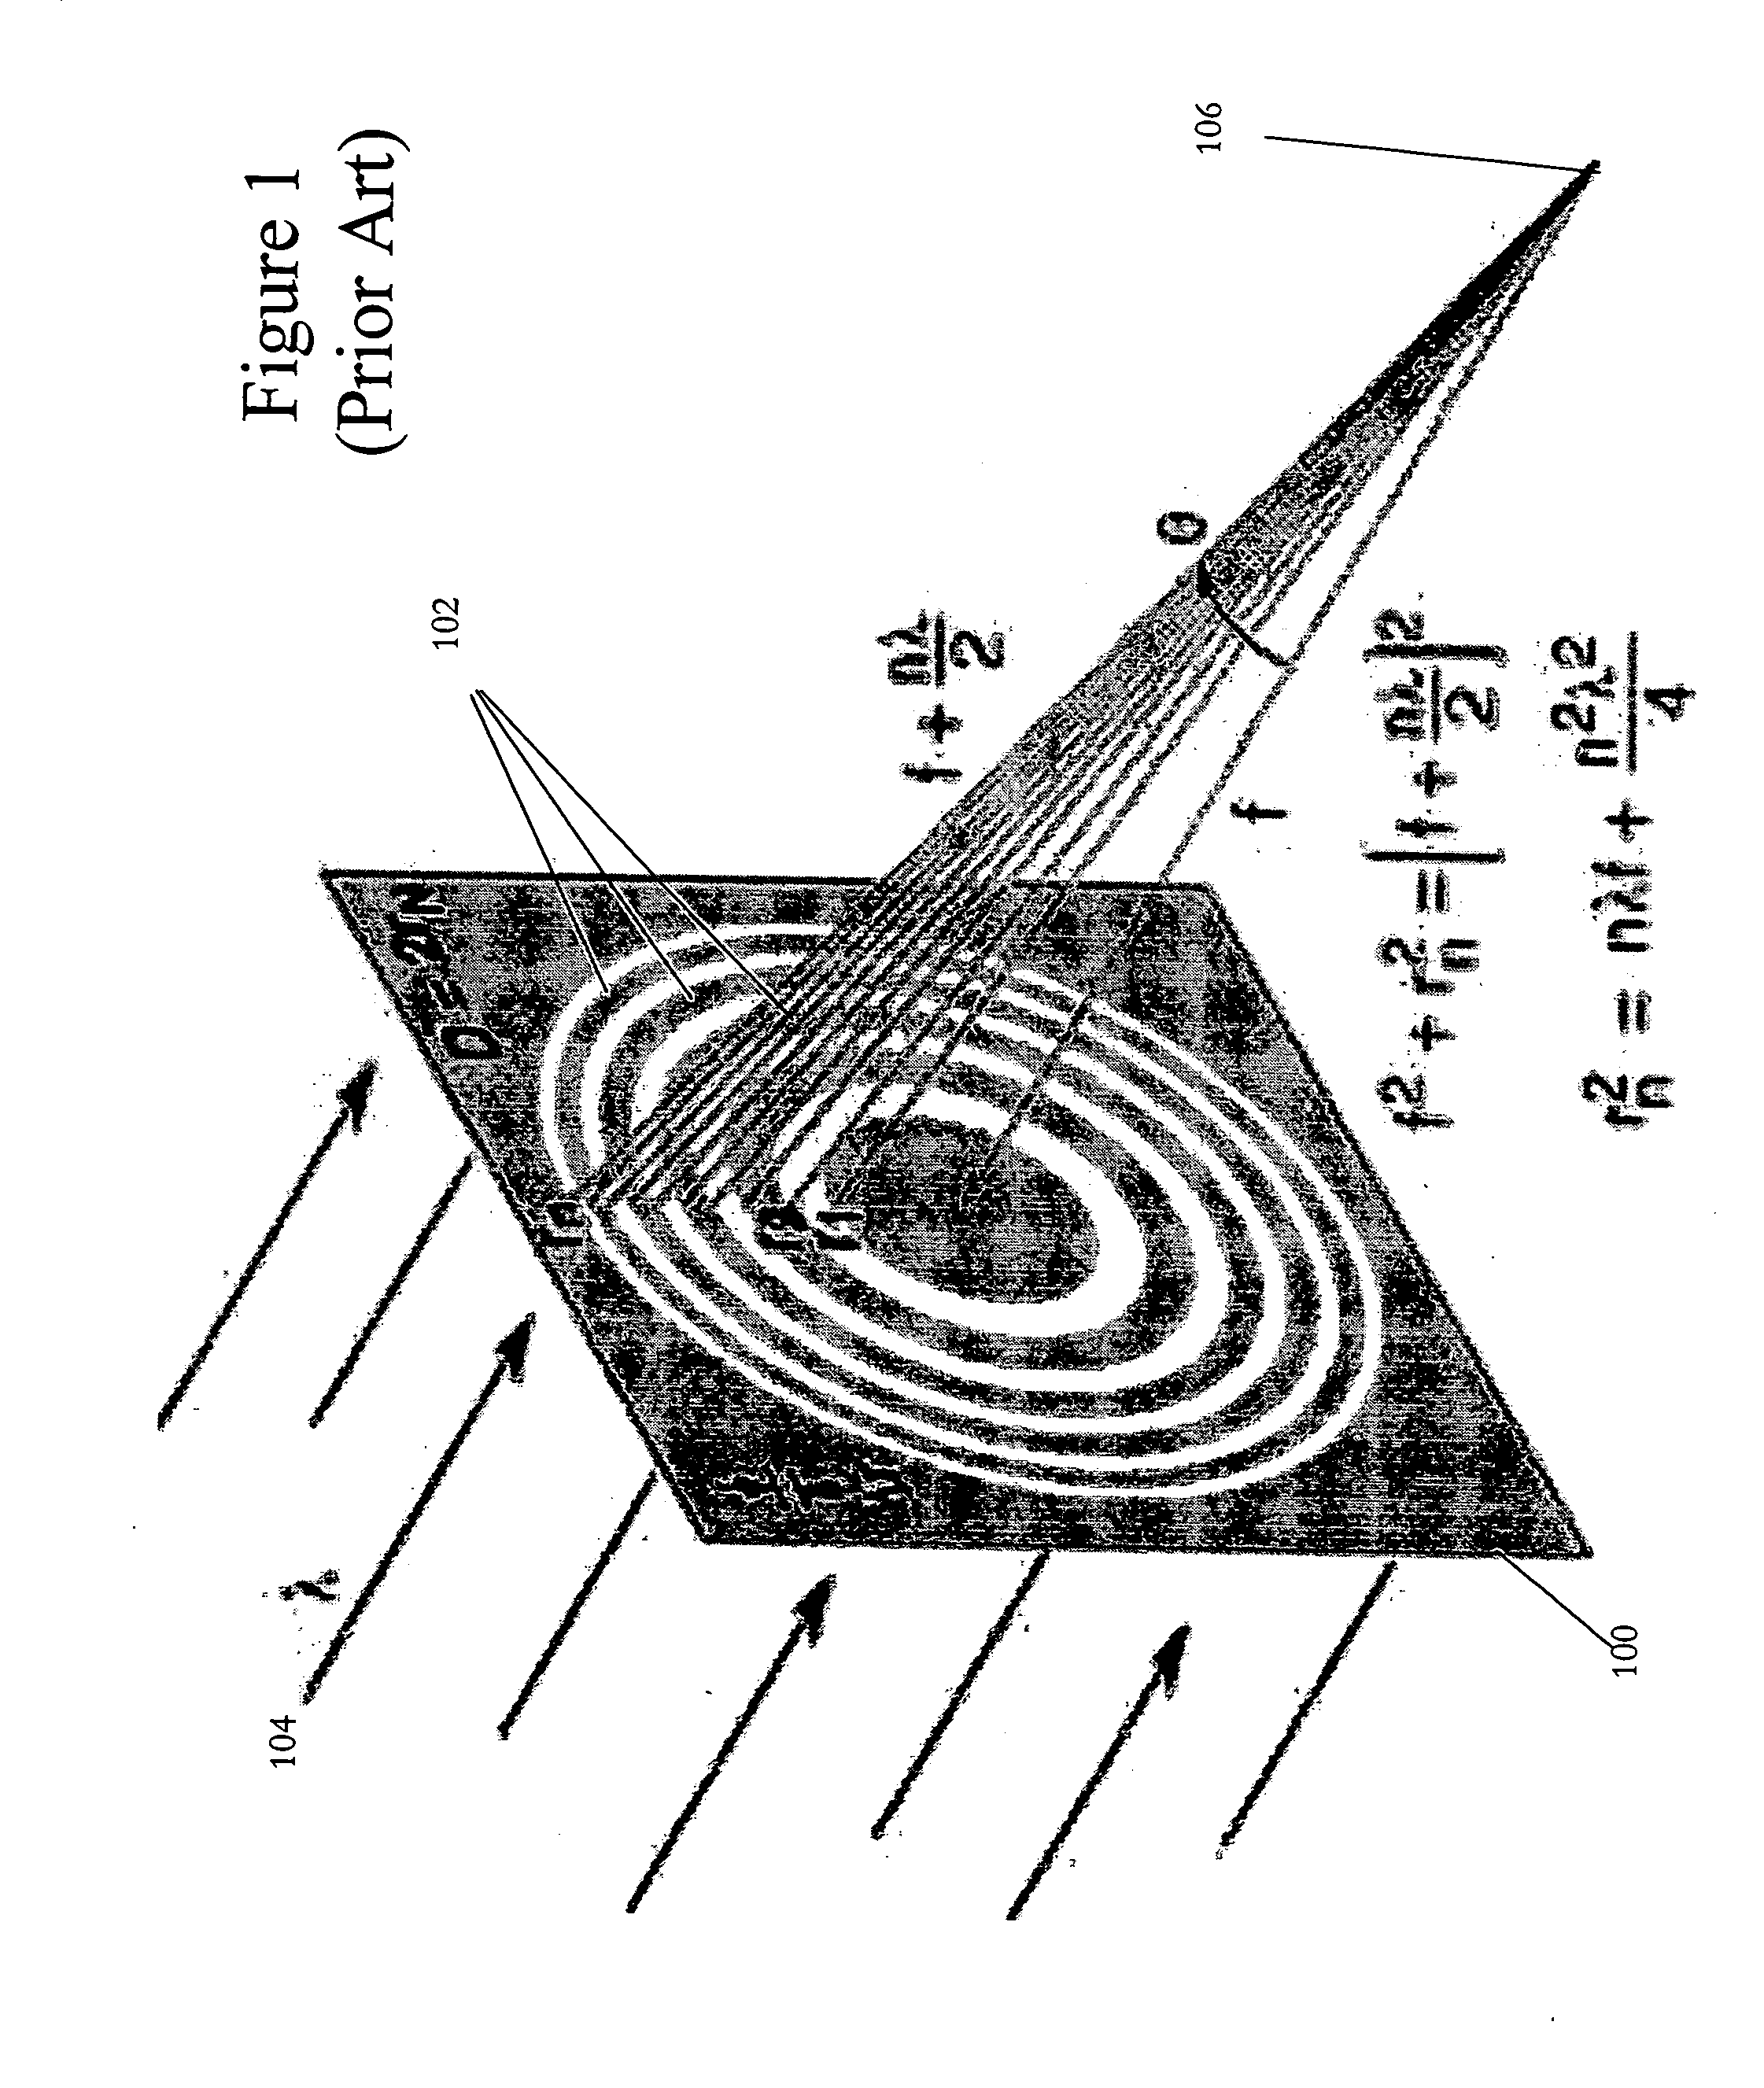 Fresnel zone plate based on elastic materials